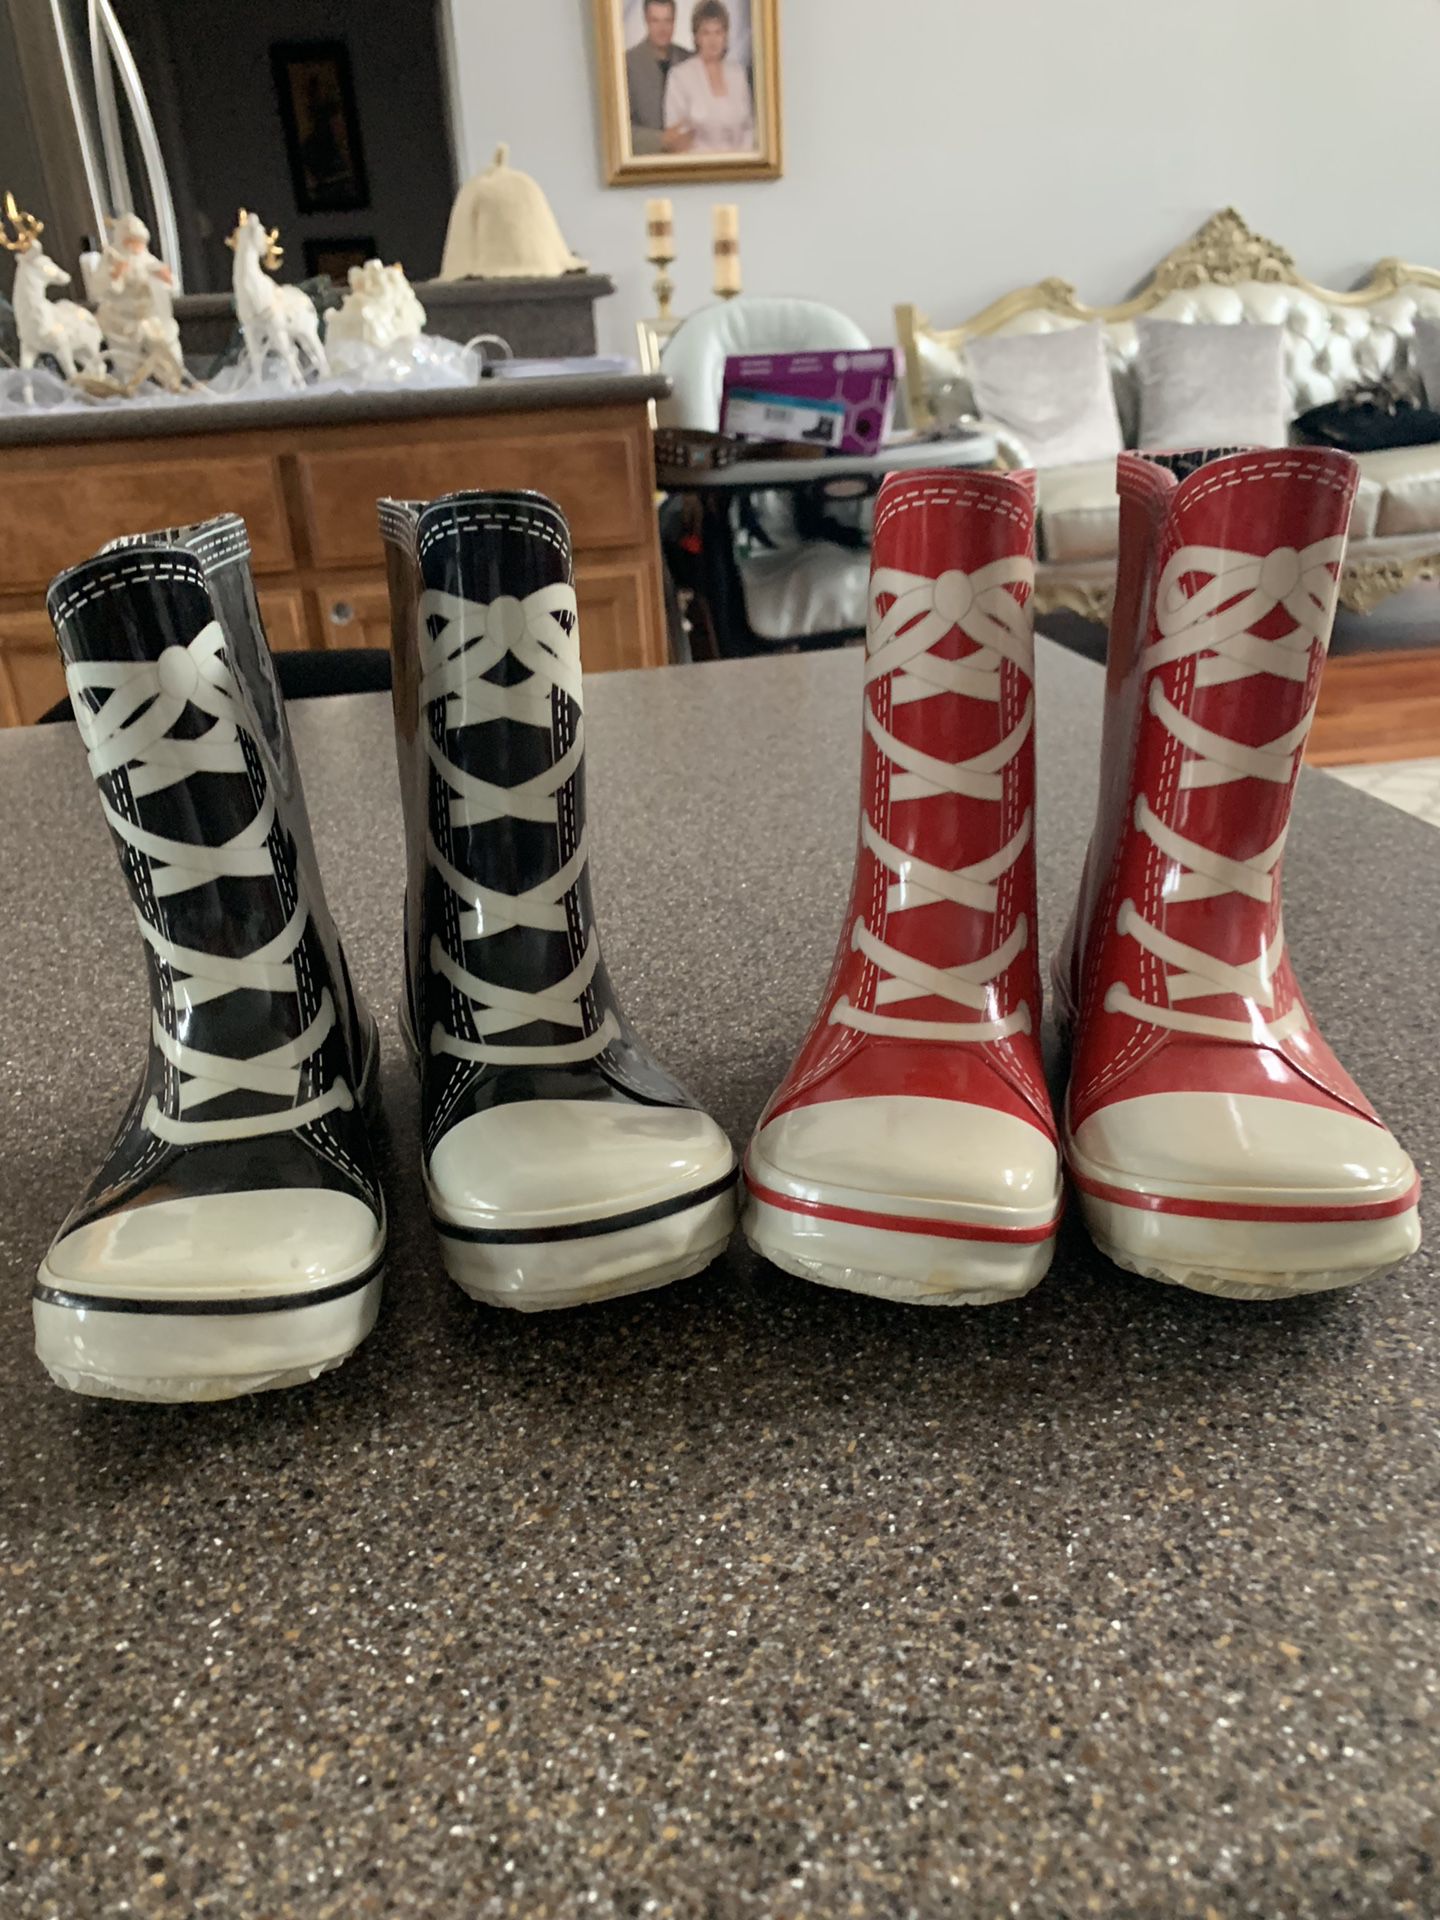 Boots boy or girls size 1-2